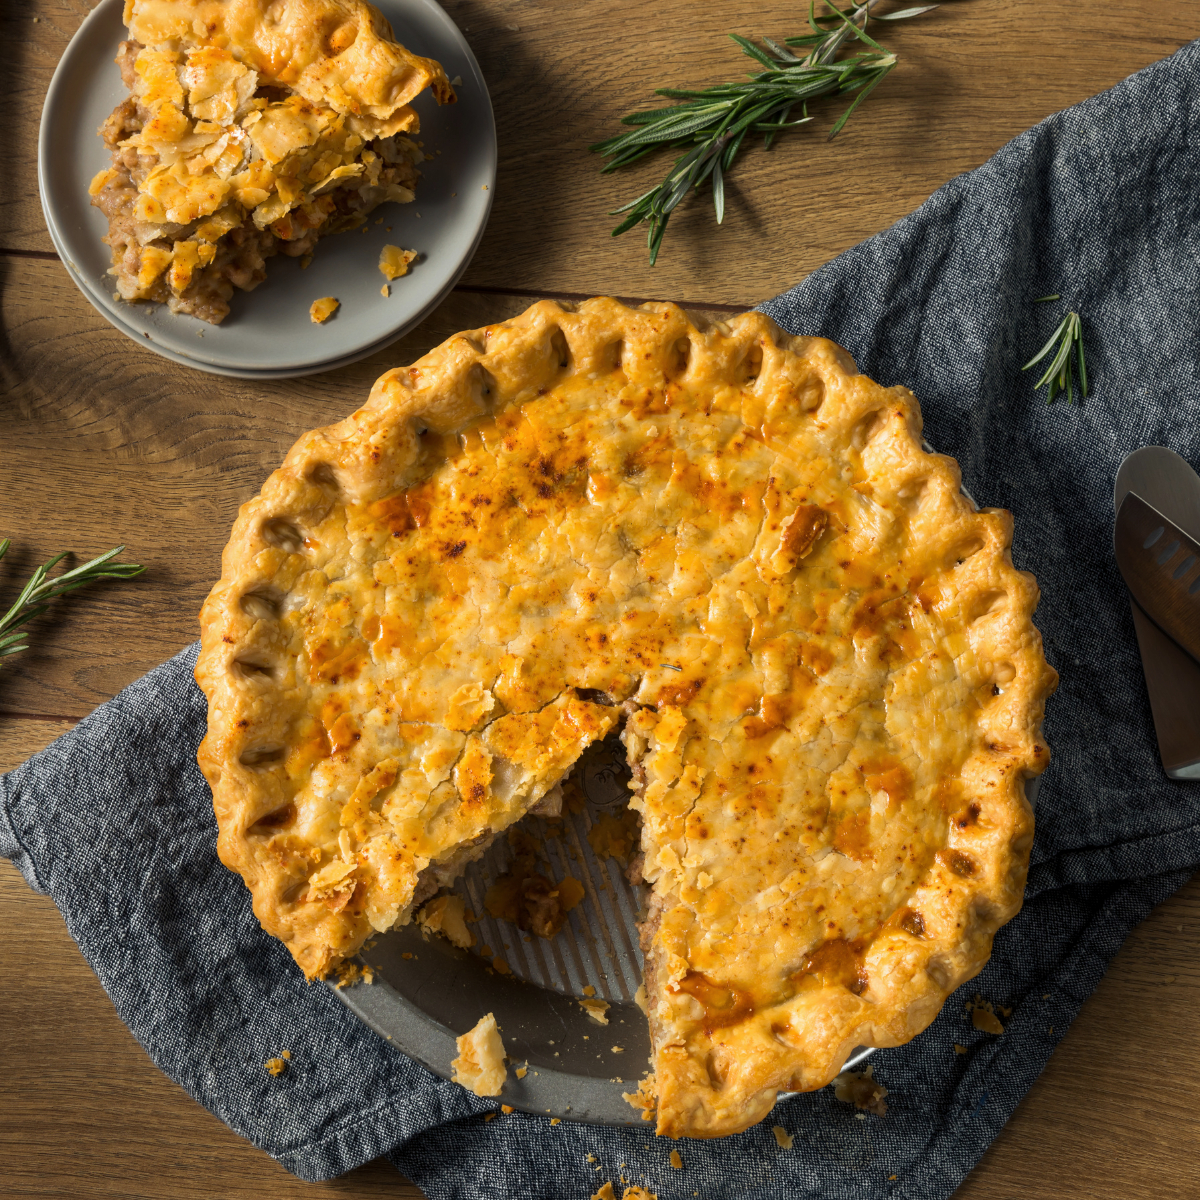 10. French VEGAN Tourtiere (Meat Pie)